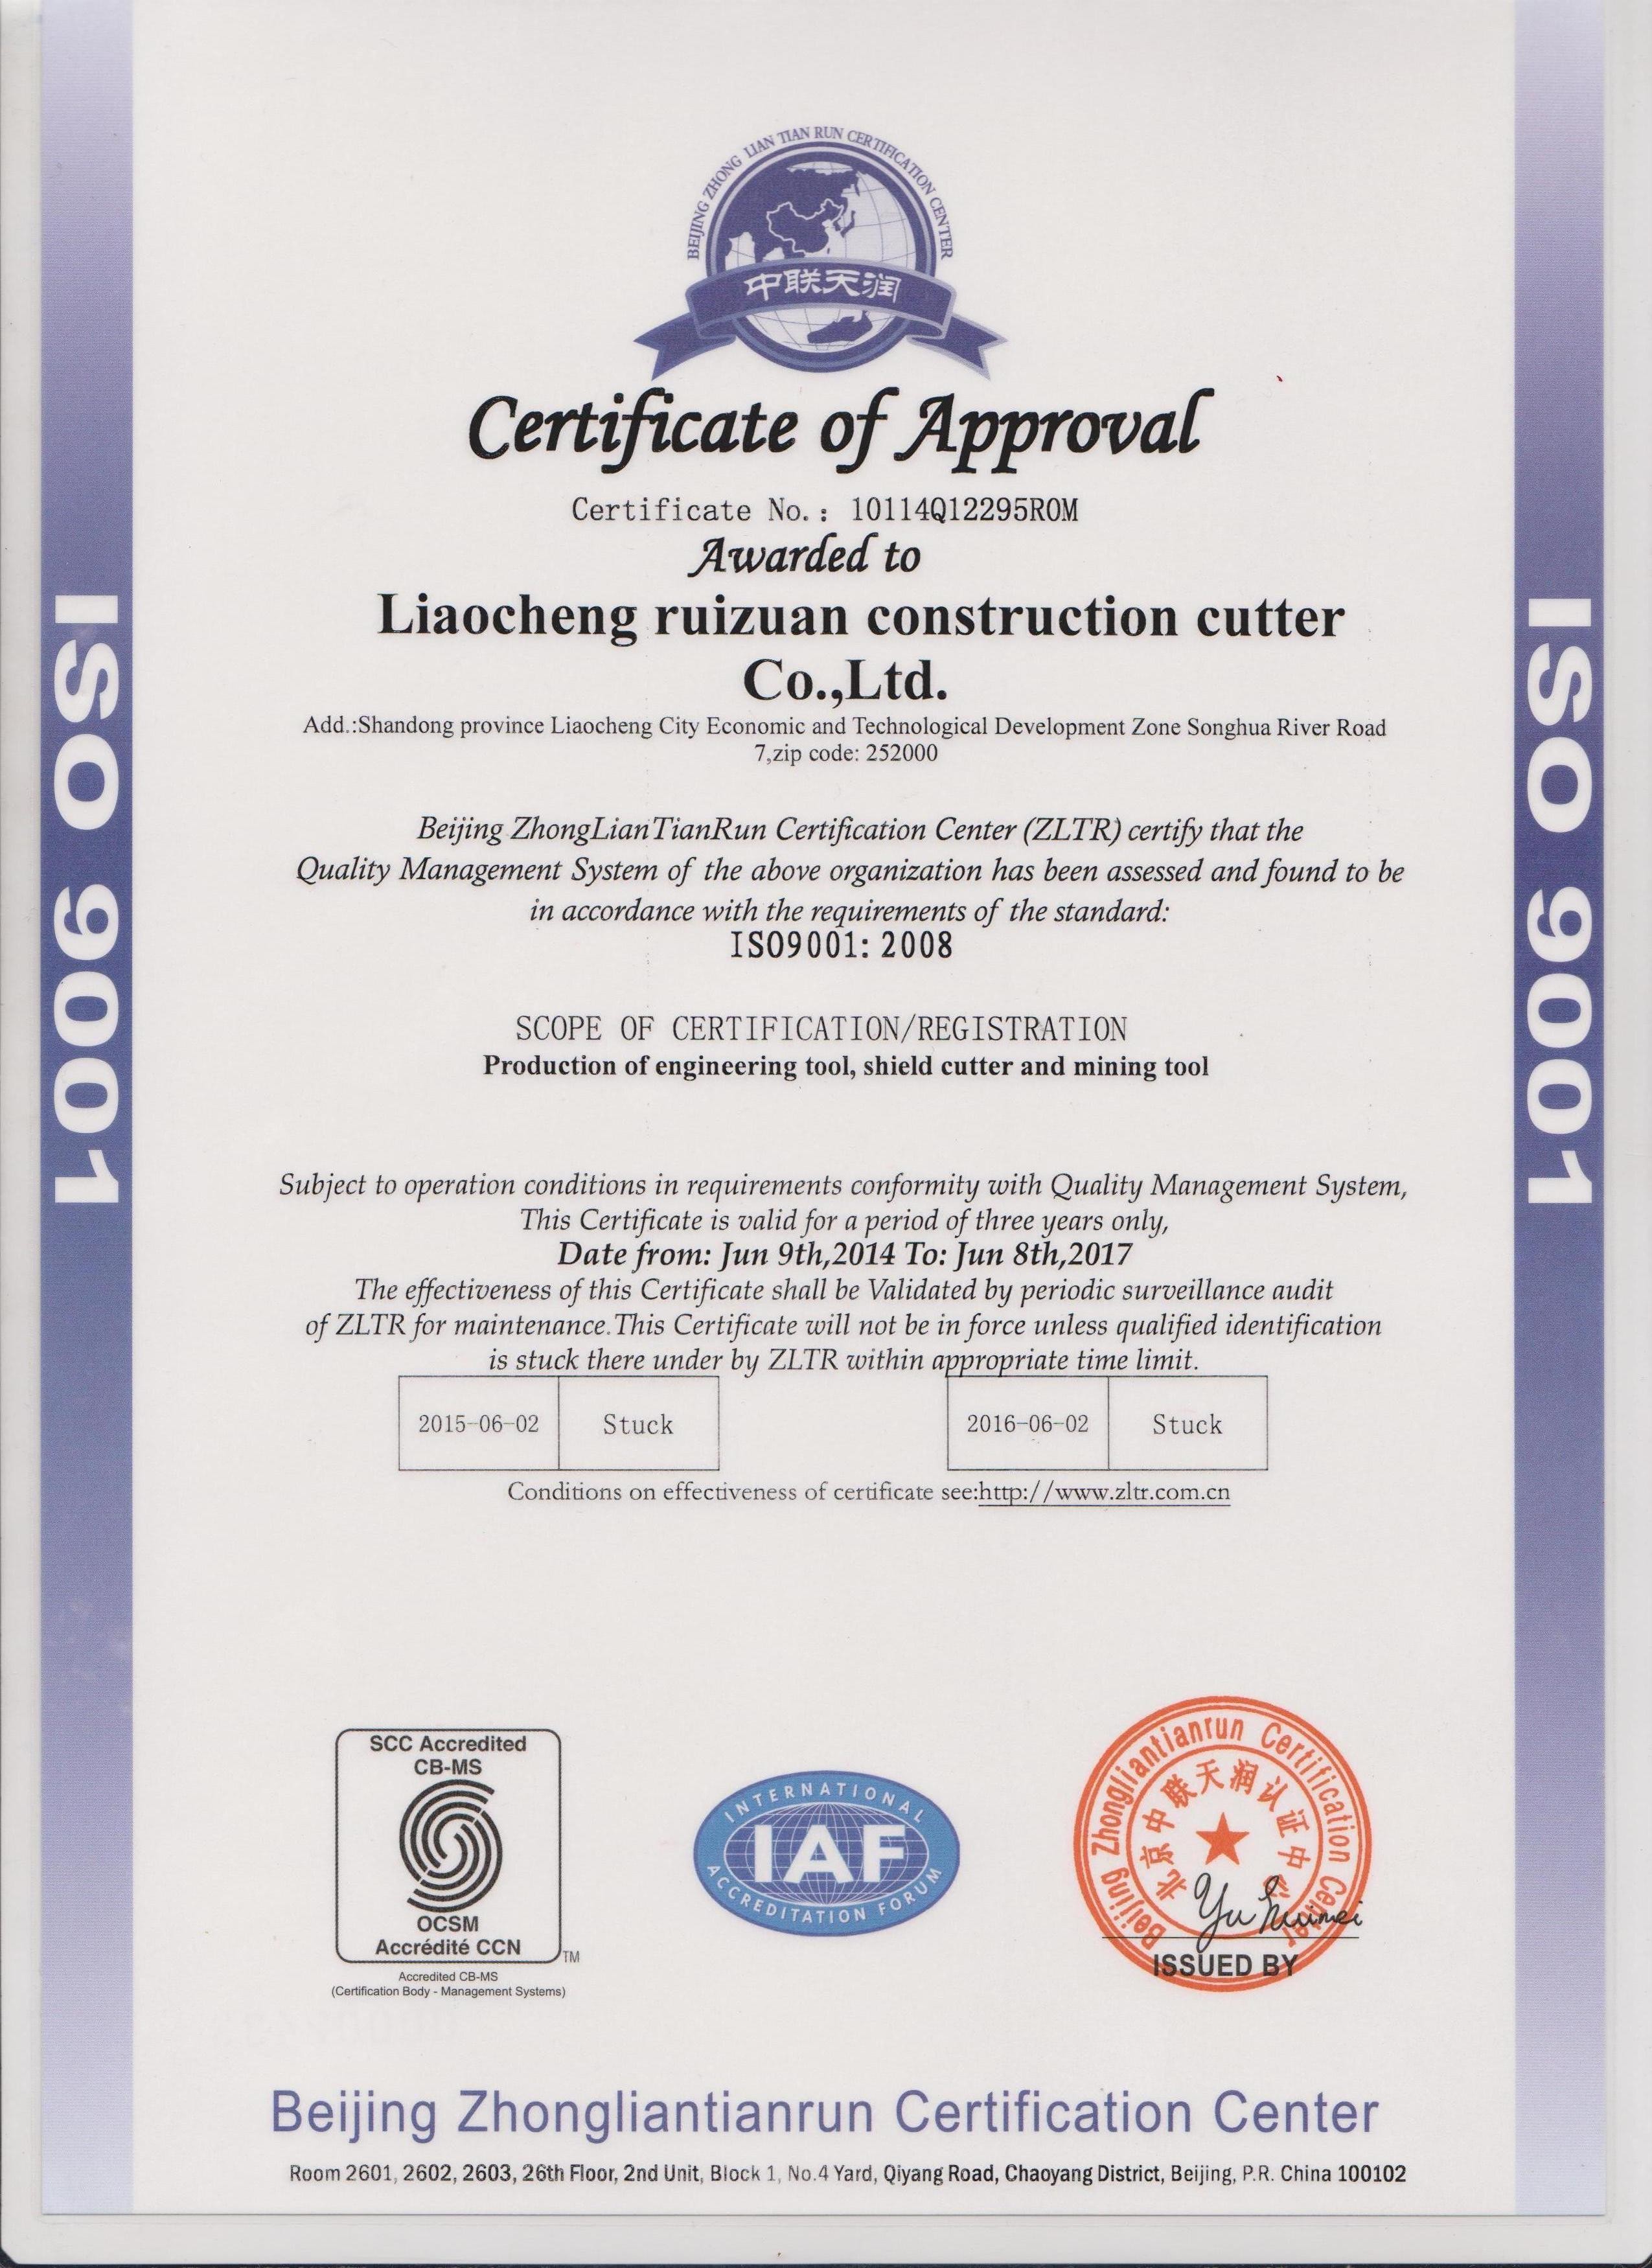 China National Complete Plant & Tools Co. Ltd. Certifications